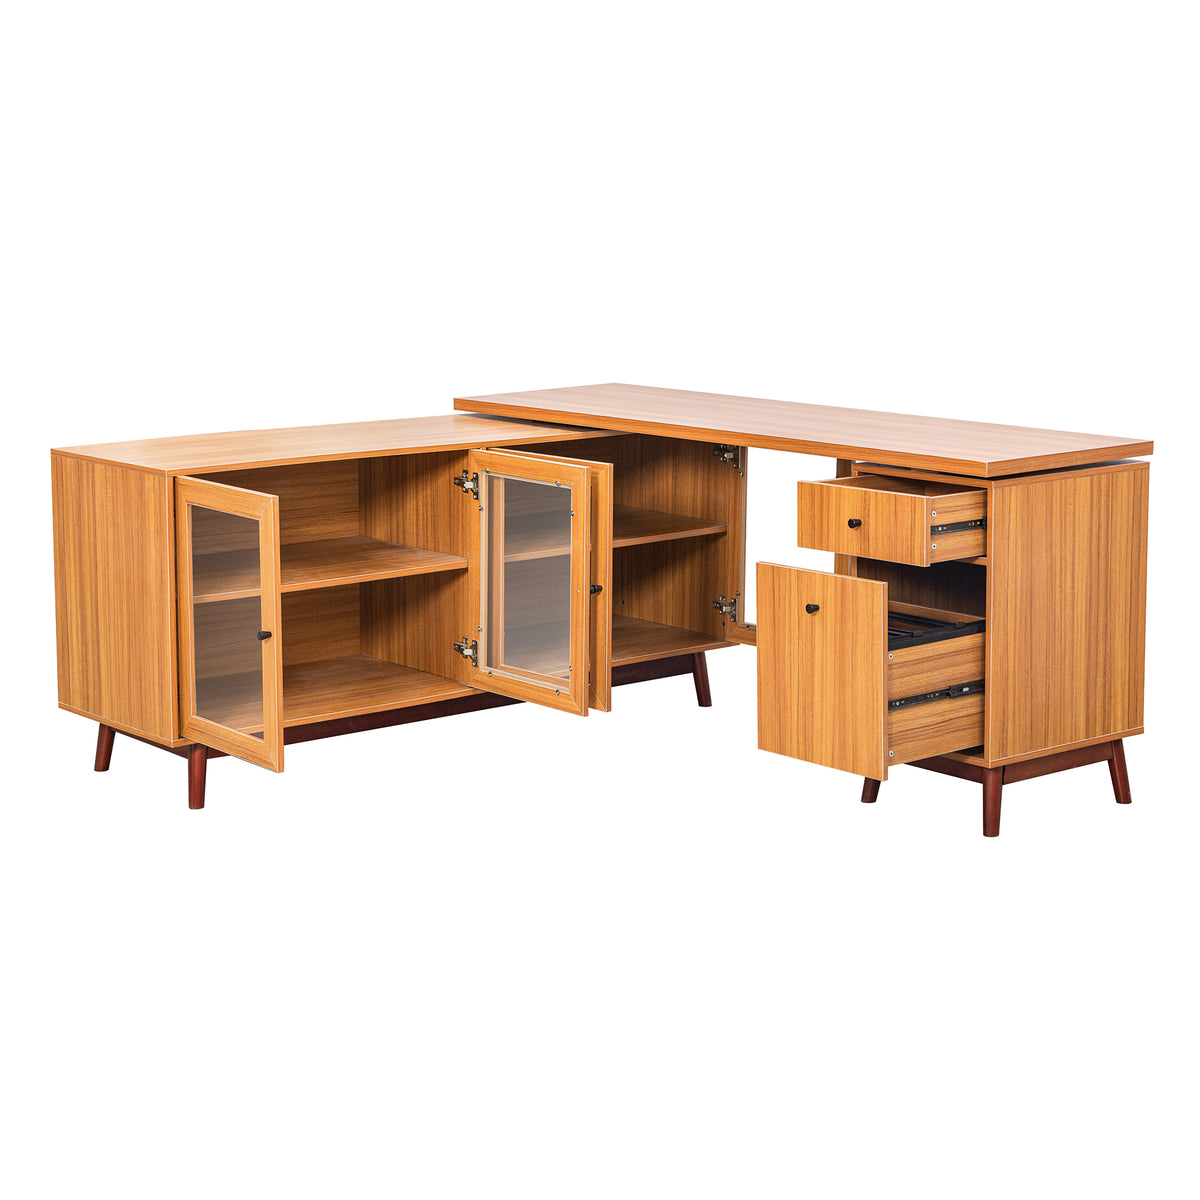 66.5" Modern L-shaped Executive Desk with delicate tempered glass Cabinet Storage,Large Office Desk with Drawers,Business Furniture Desk Workstation for Home Office,Teak